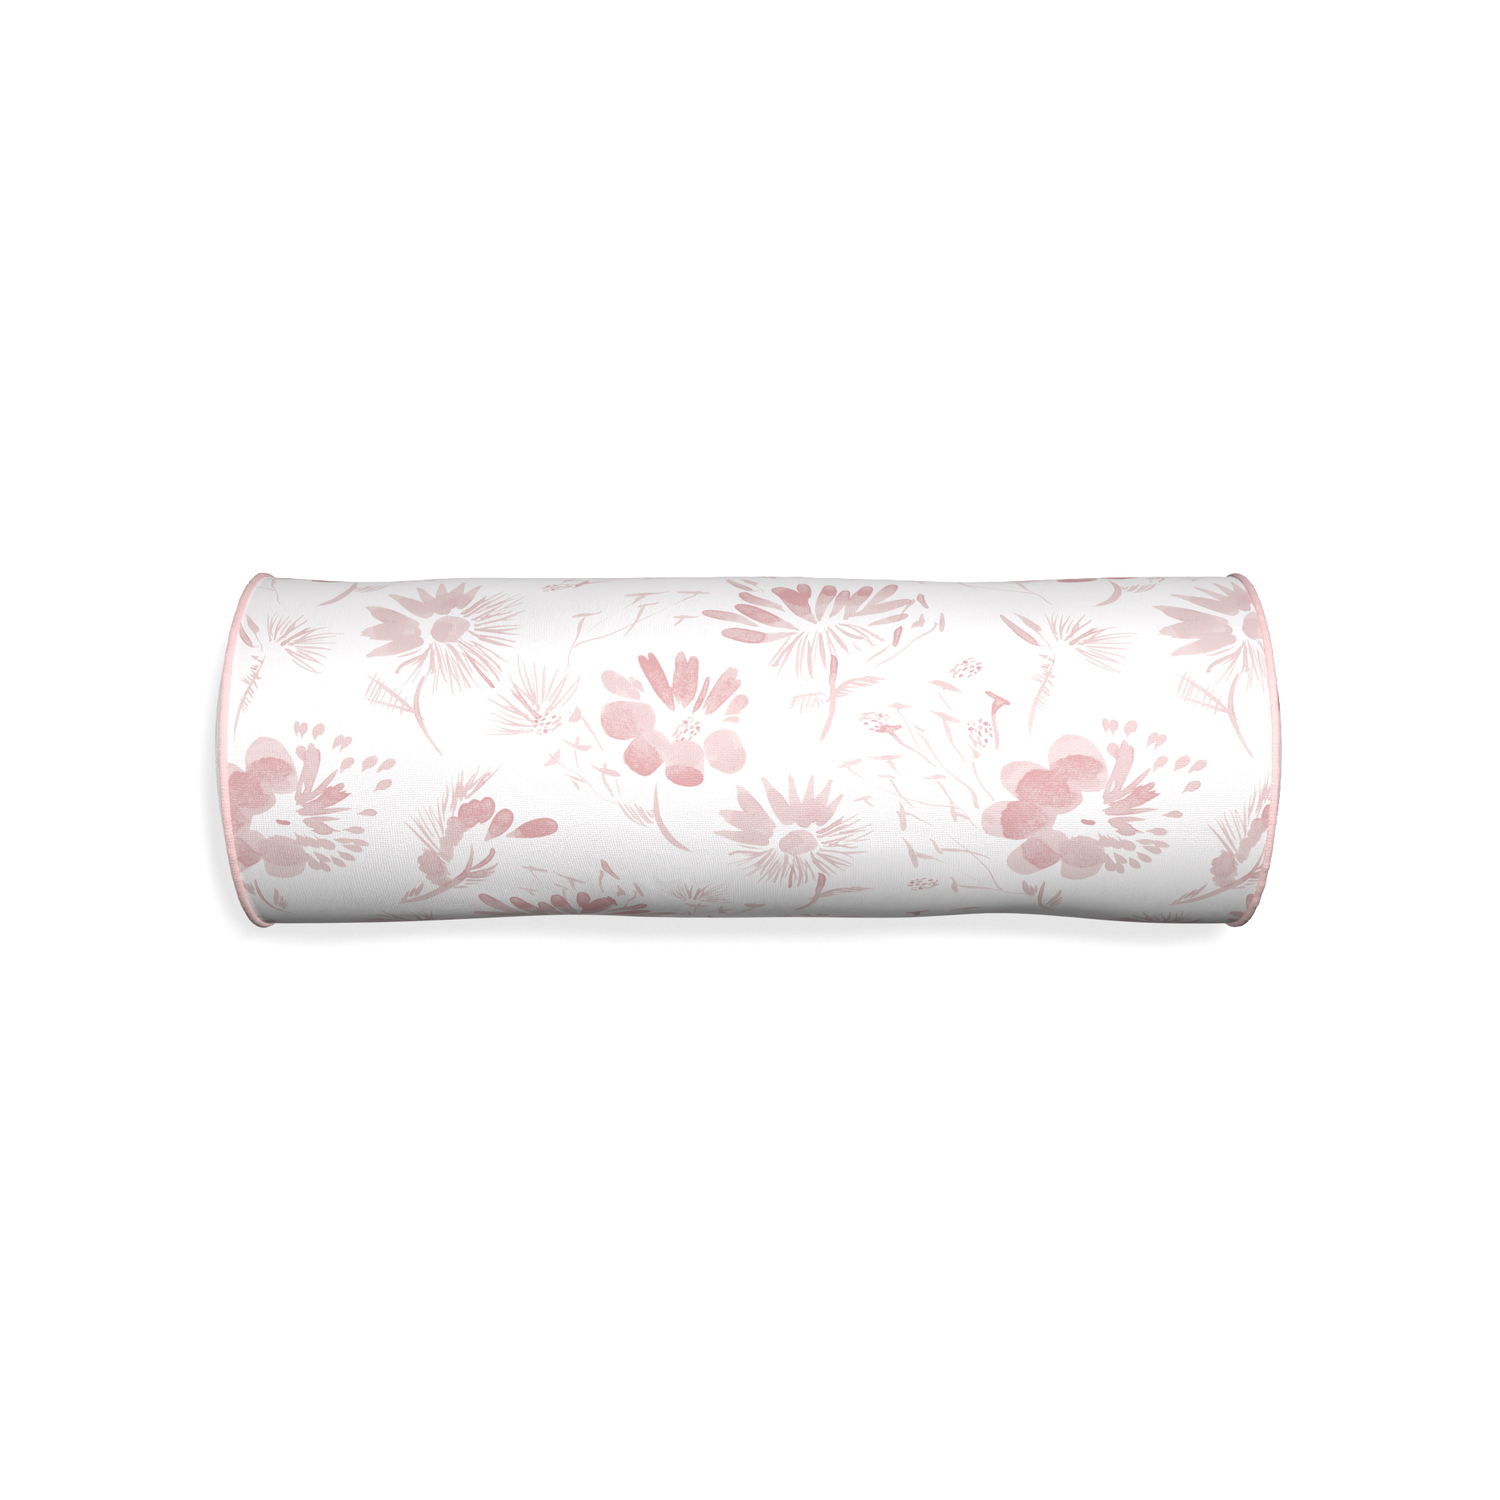 Bolster blake custom pink floralpillow with petal piping on white background